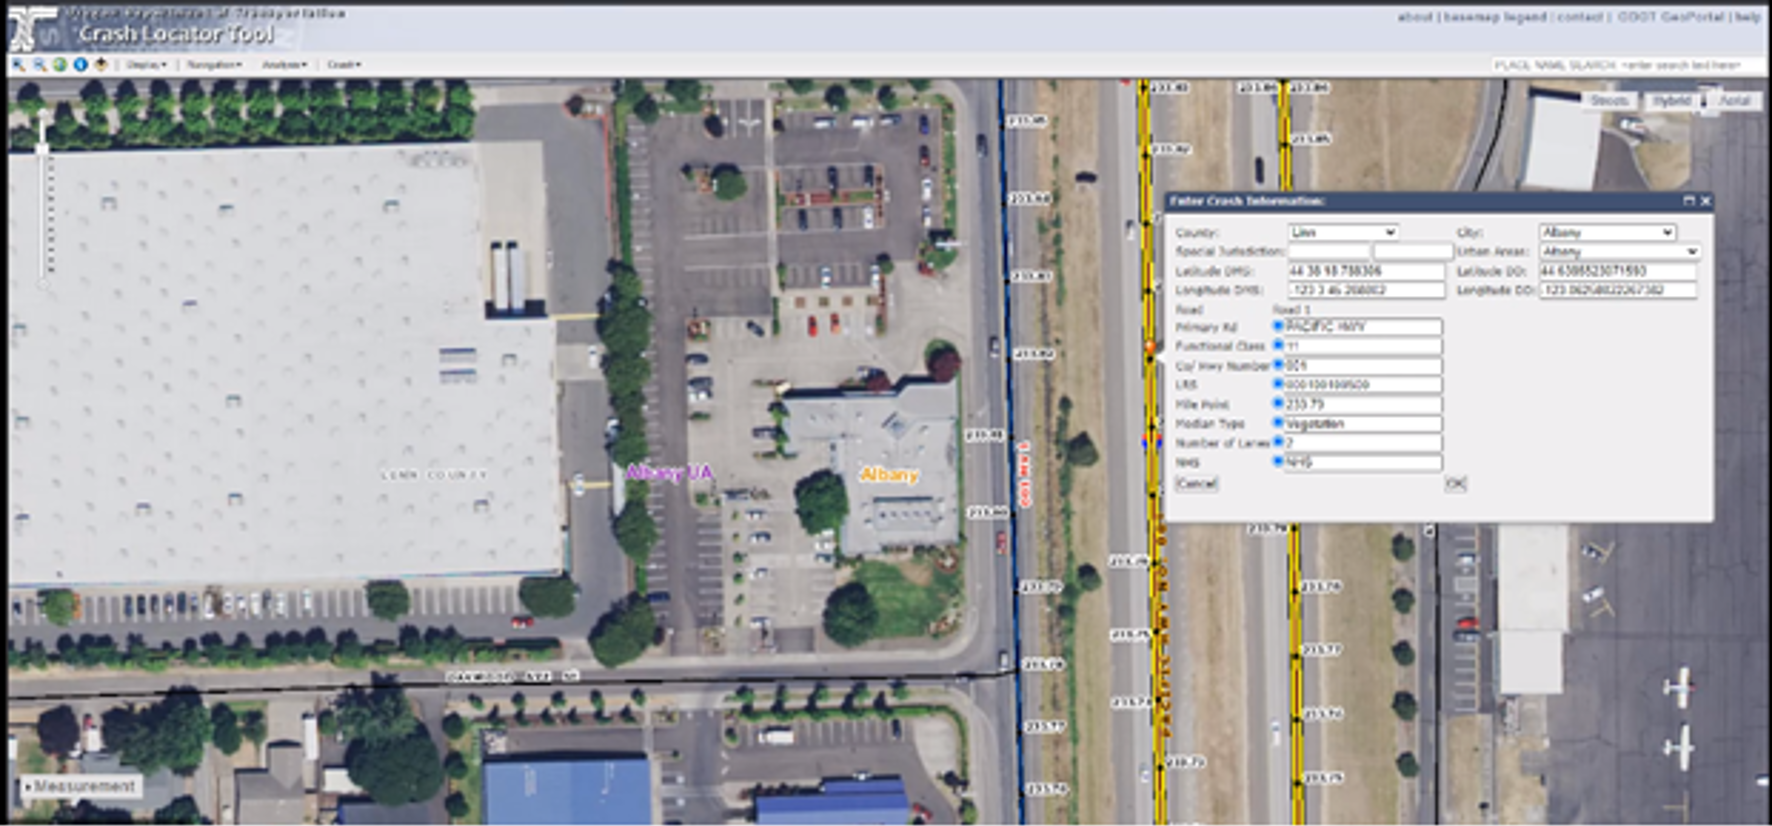 screenshot of the CTL Mapping Interface showing the aerial view of a crash location with a popup containing details of the crash location, including latitude and longitude